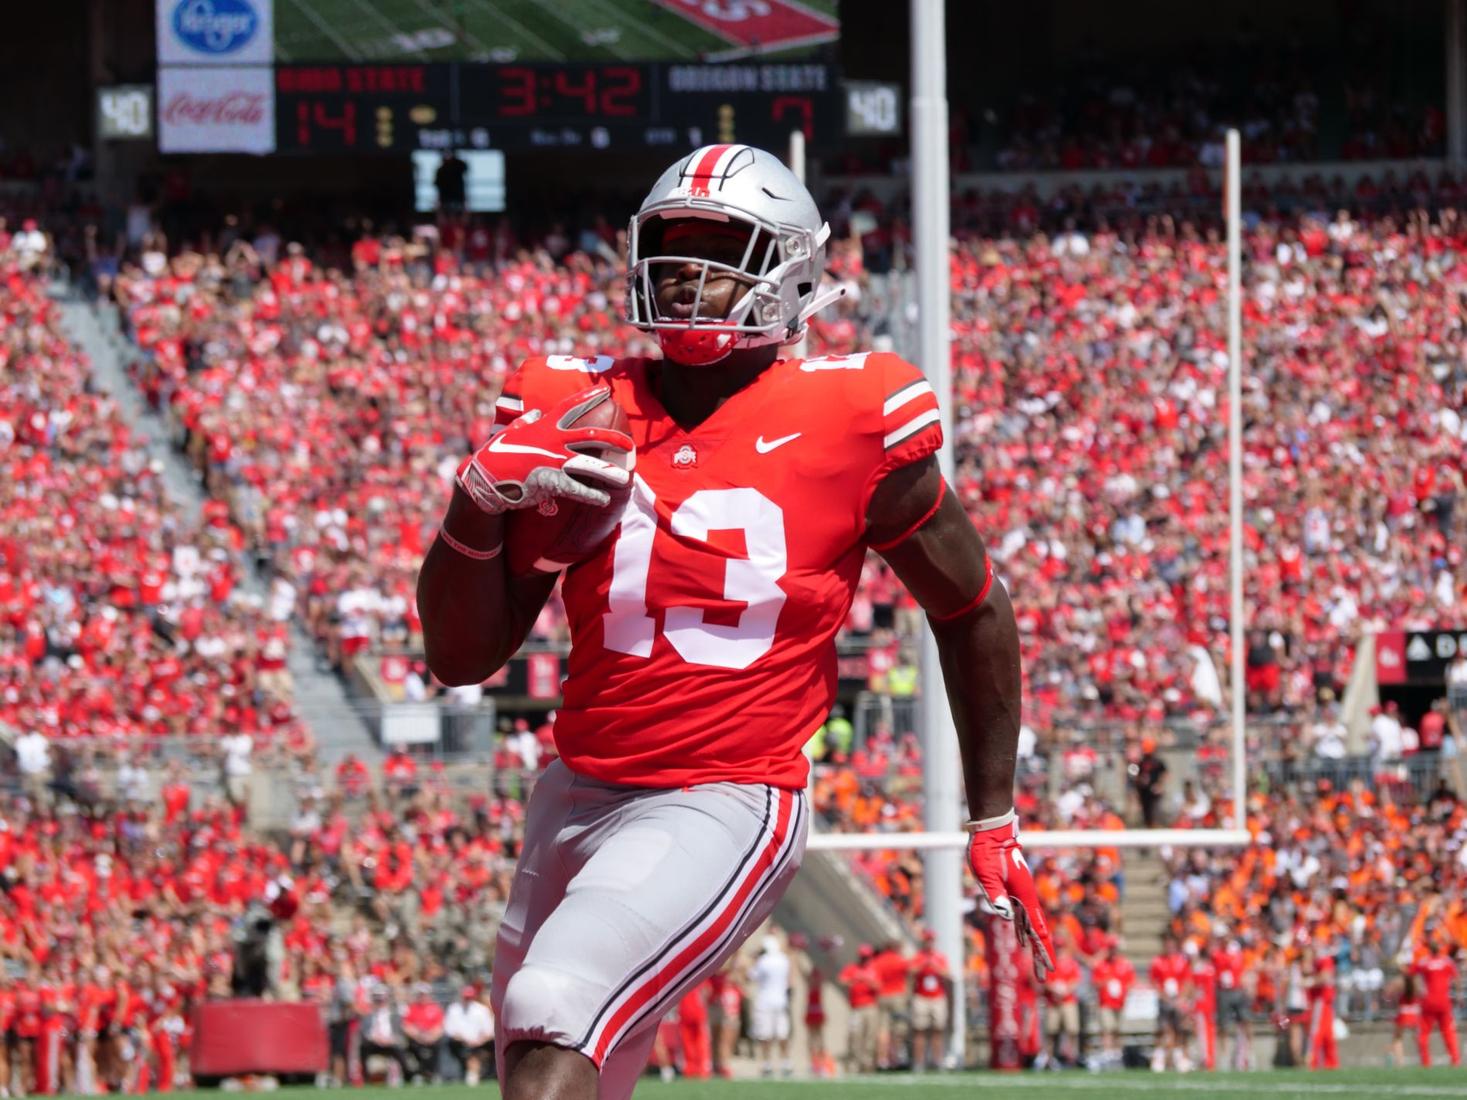 Ohio State Opens Season with Impressive Offensive Display, Downing Oregon State, 77-31